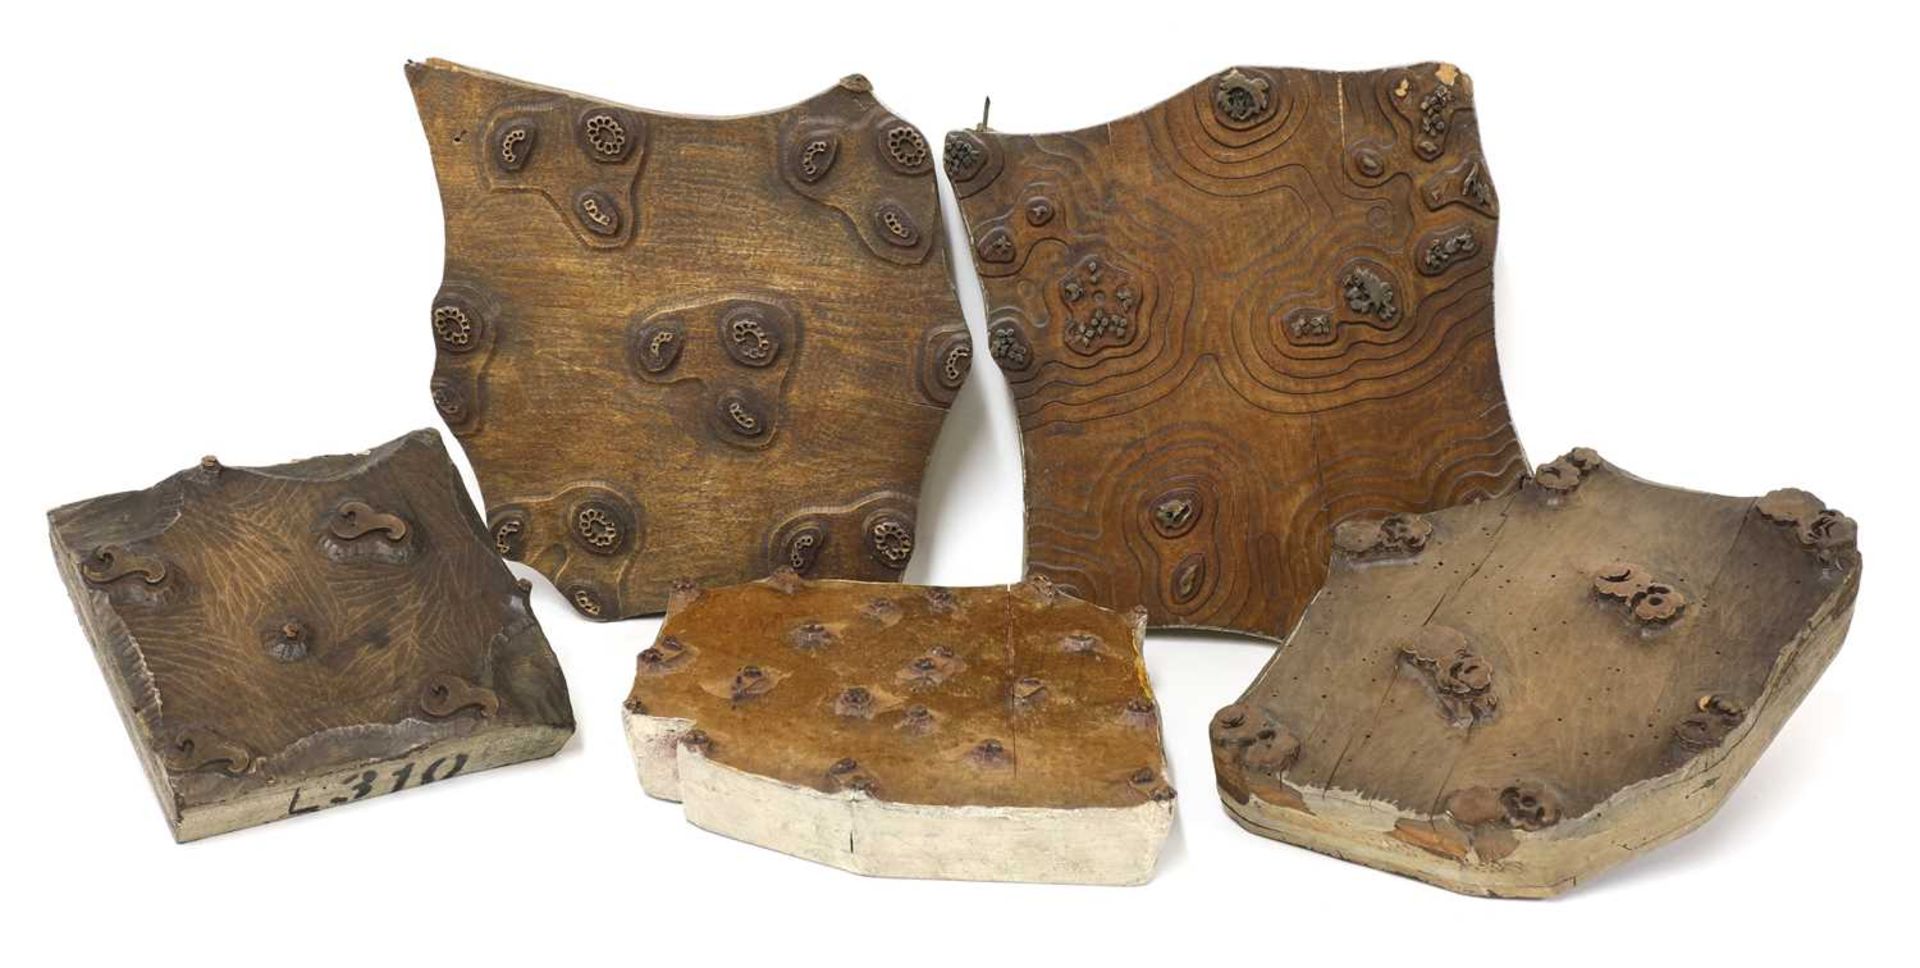 Five wooden hand printing blocks from the William Morris printing works at Merton Abbey, - Image 2 of 3